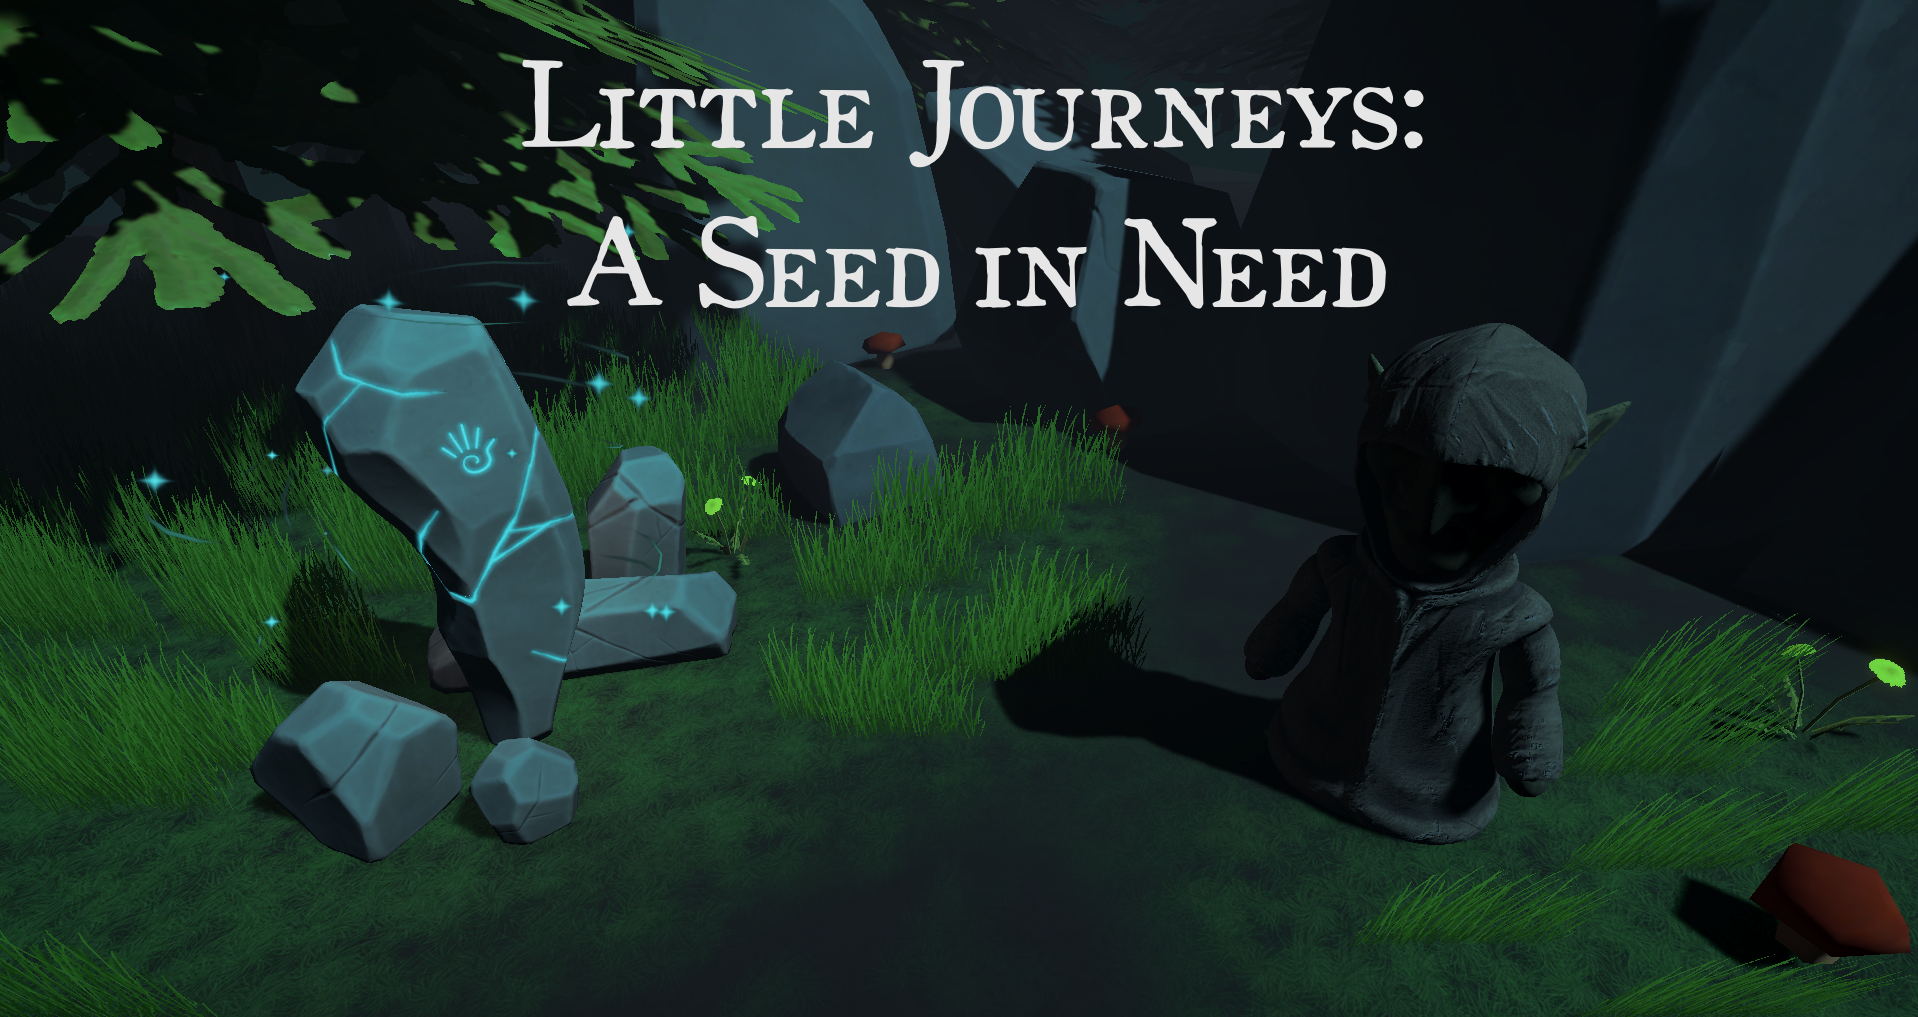 Little Journeys: A Seed in Need